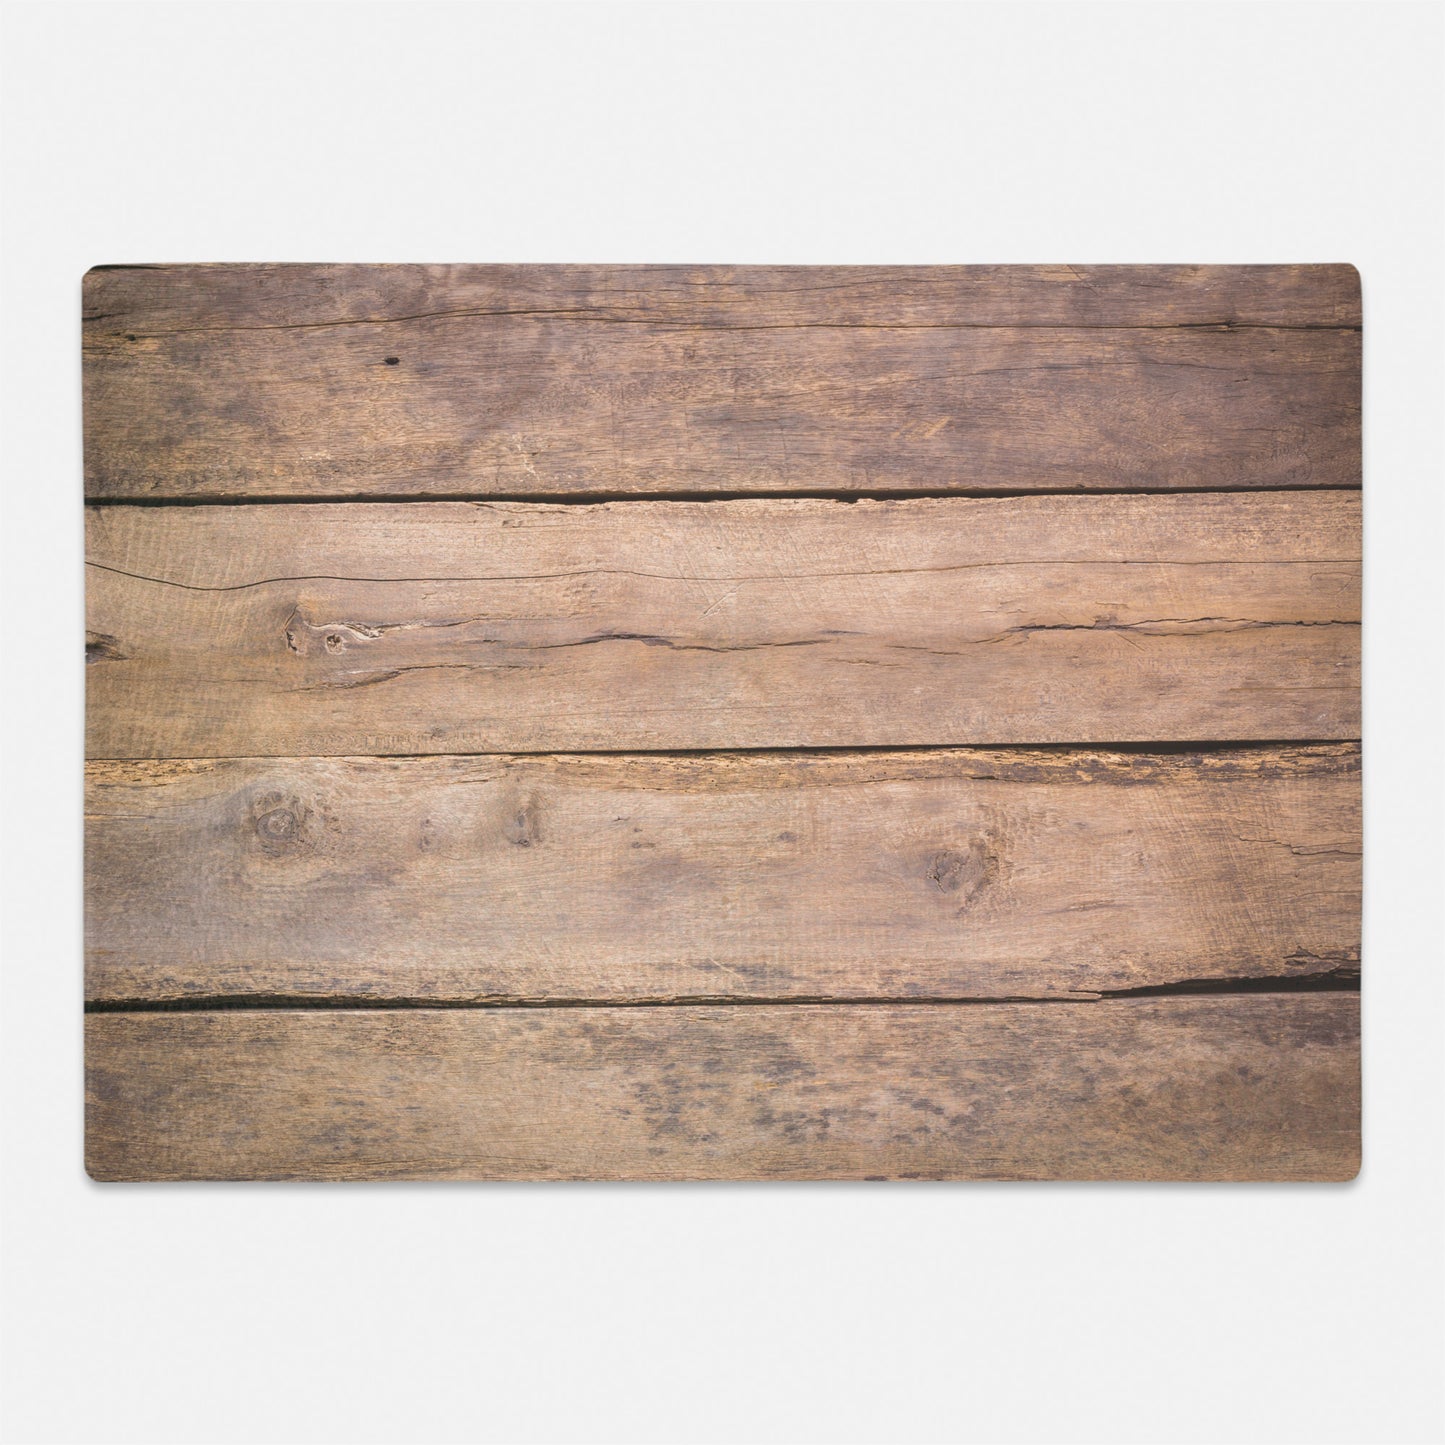 wooden plank printed on glass cutting board for gift